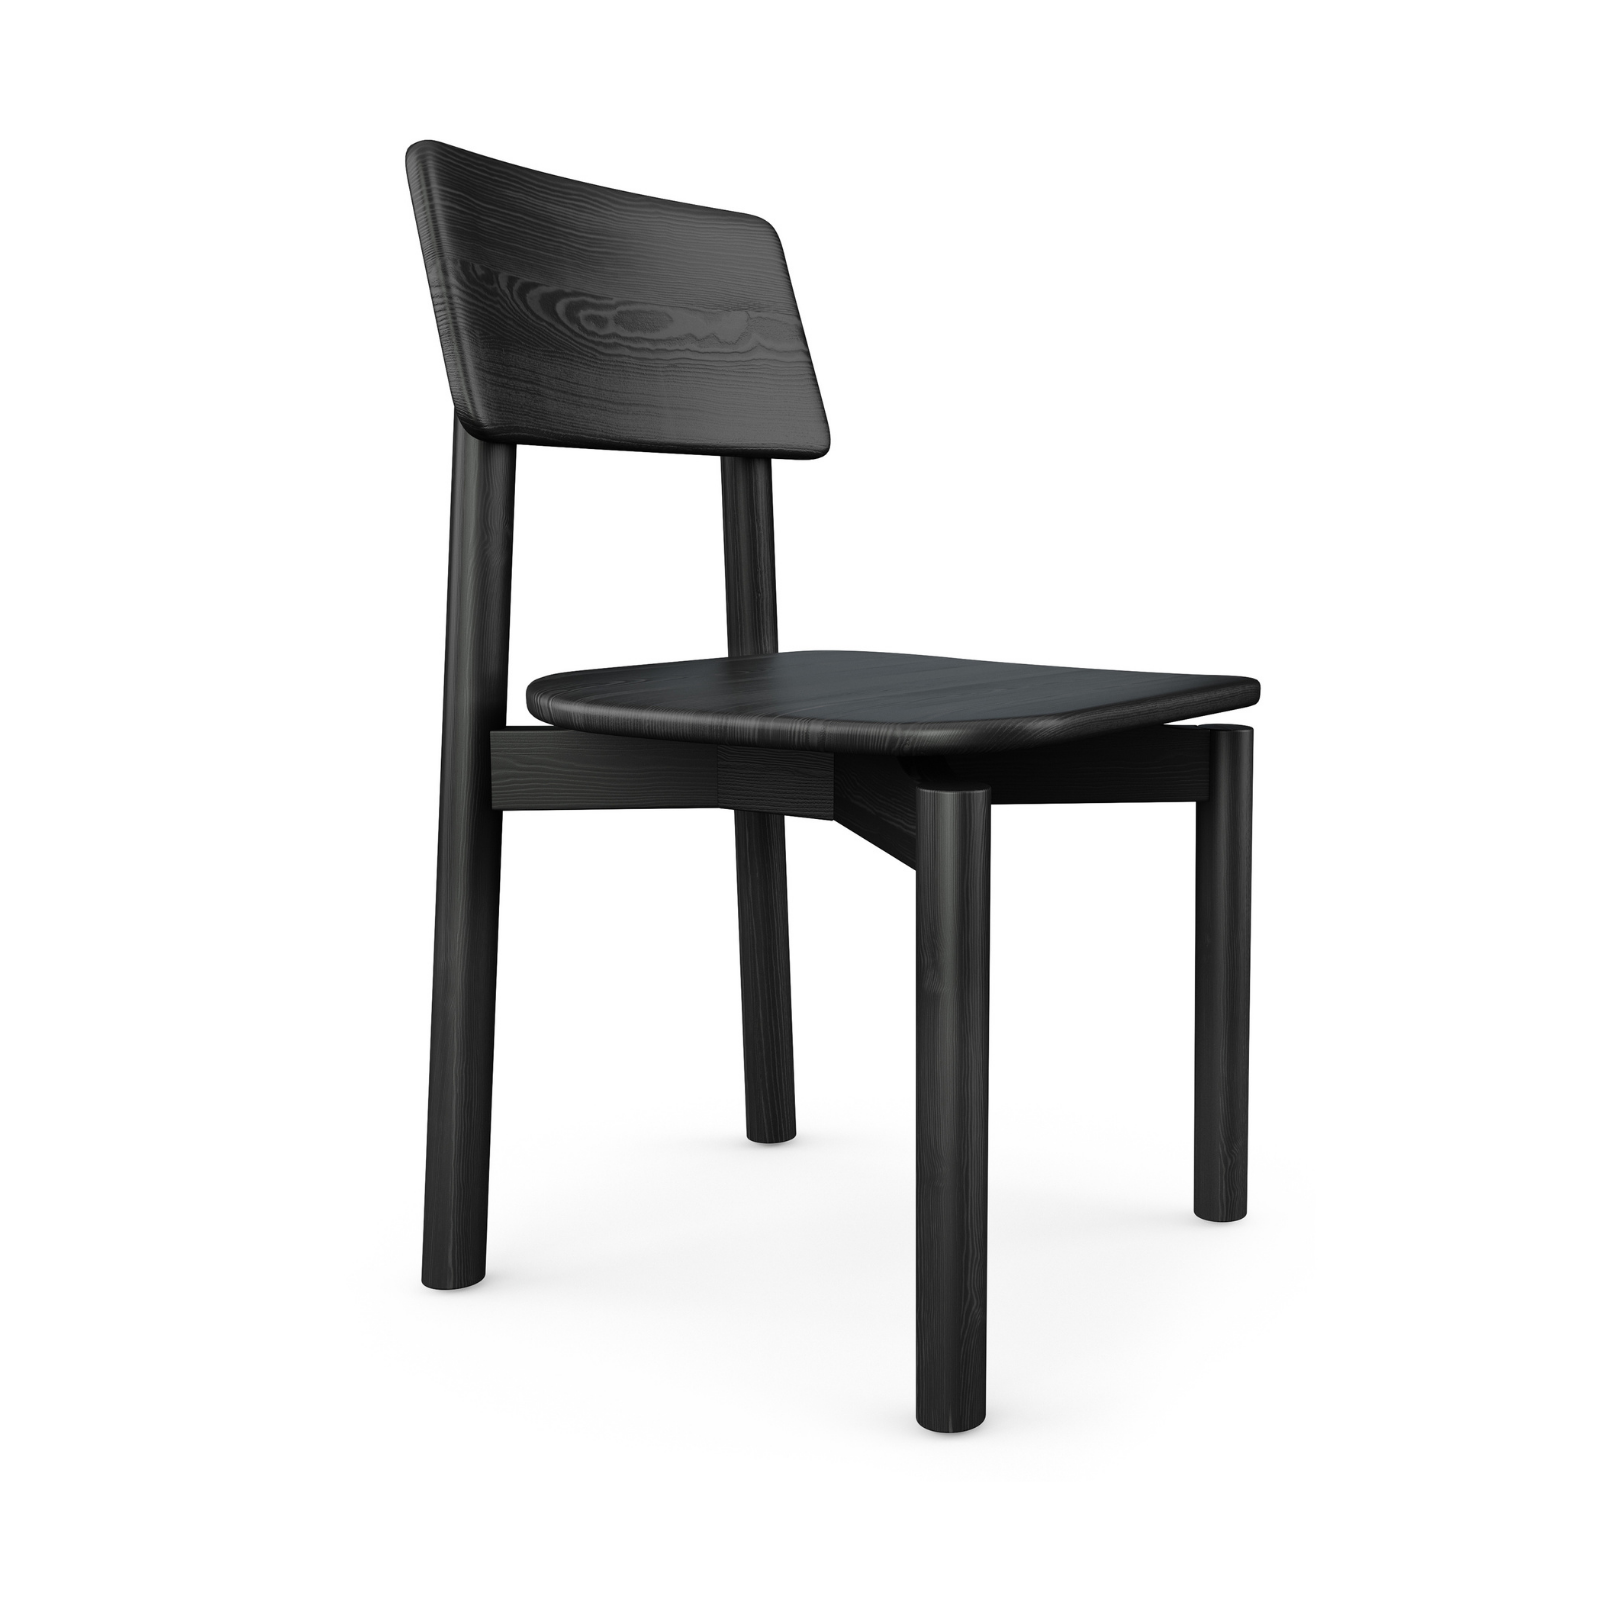 Gus* Modern Ridley Dining Chair - Set of 2